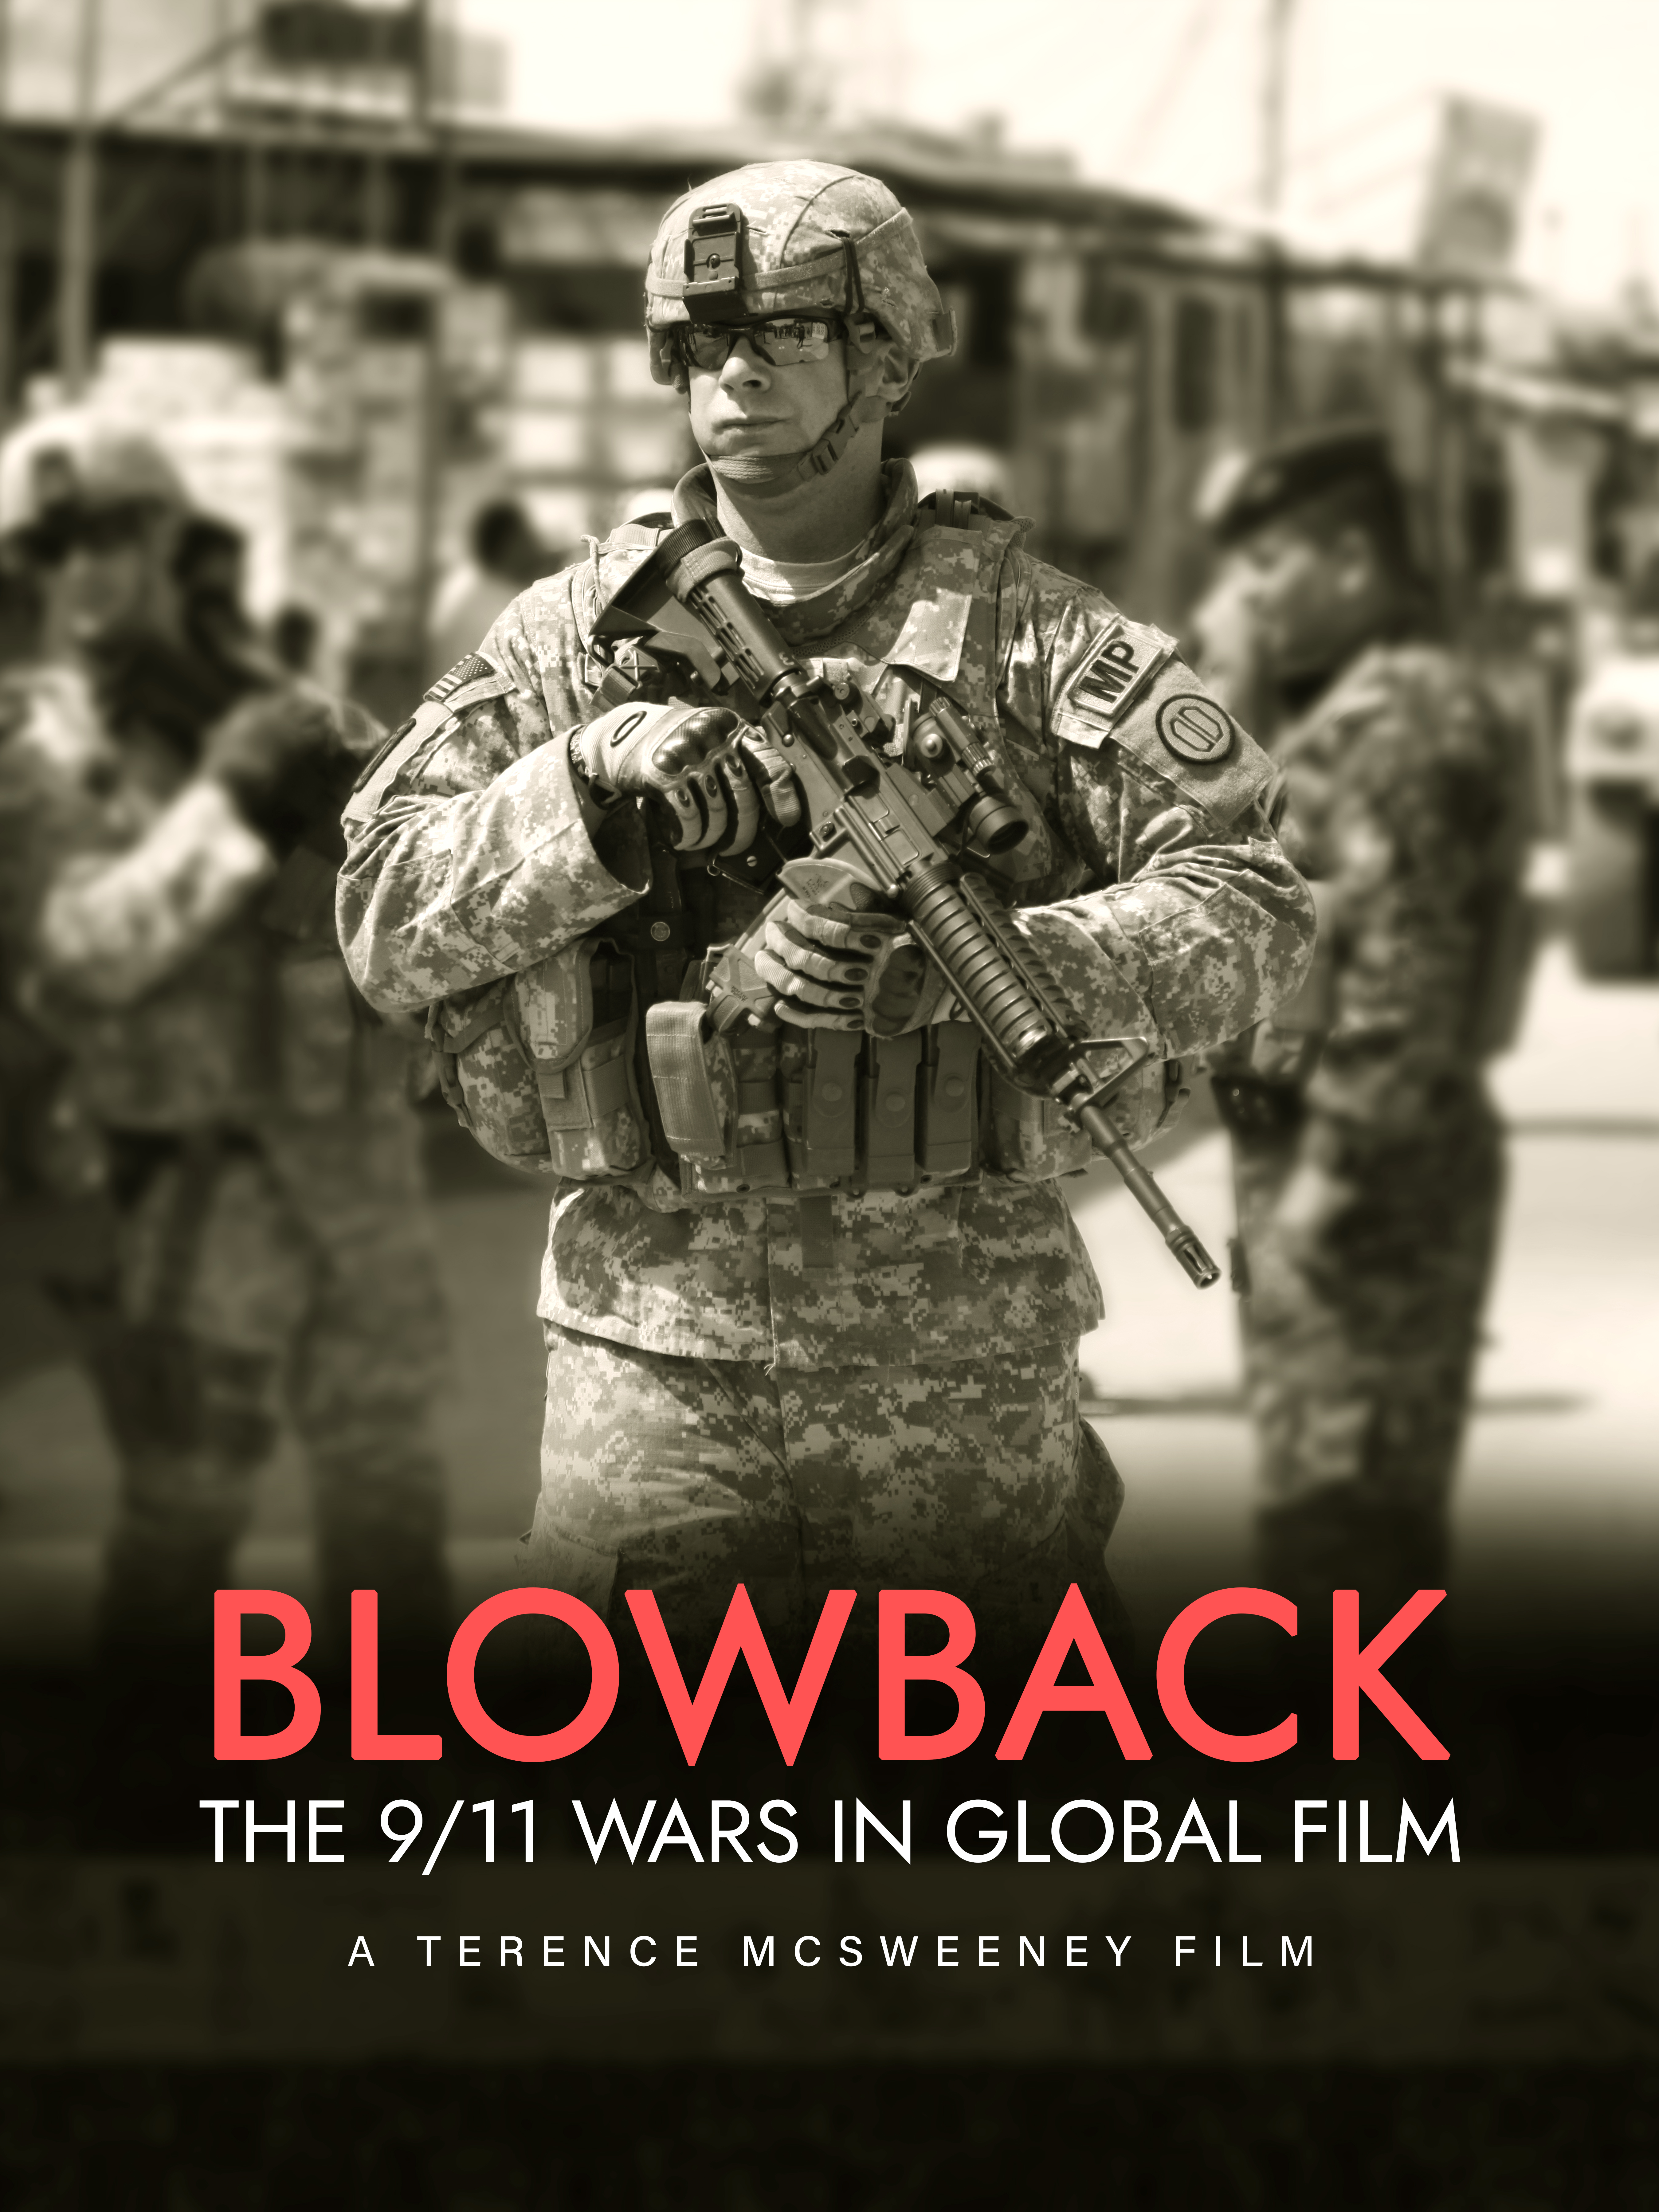 Picture shows American soldier, with the wording: Blowback, The 9/11 wars in Global Film - A Terence McSweeney Film